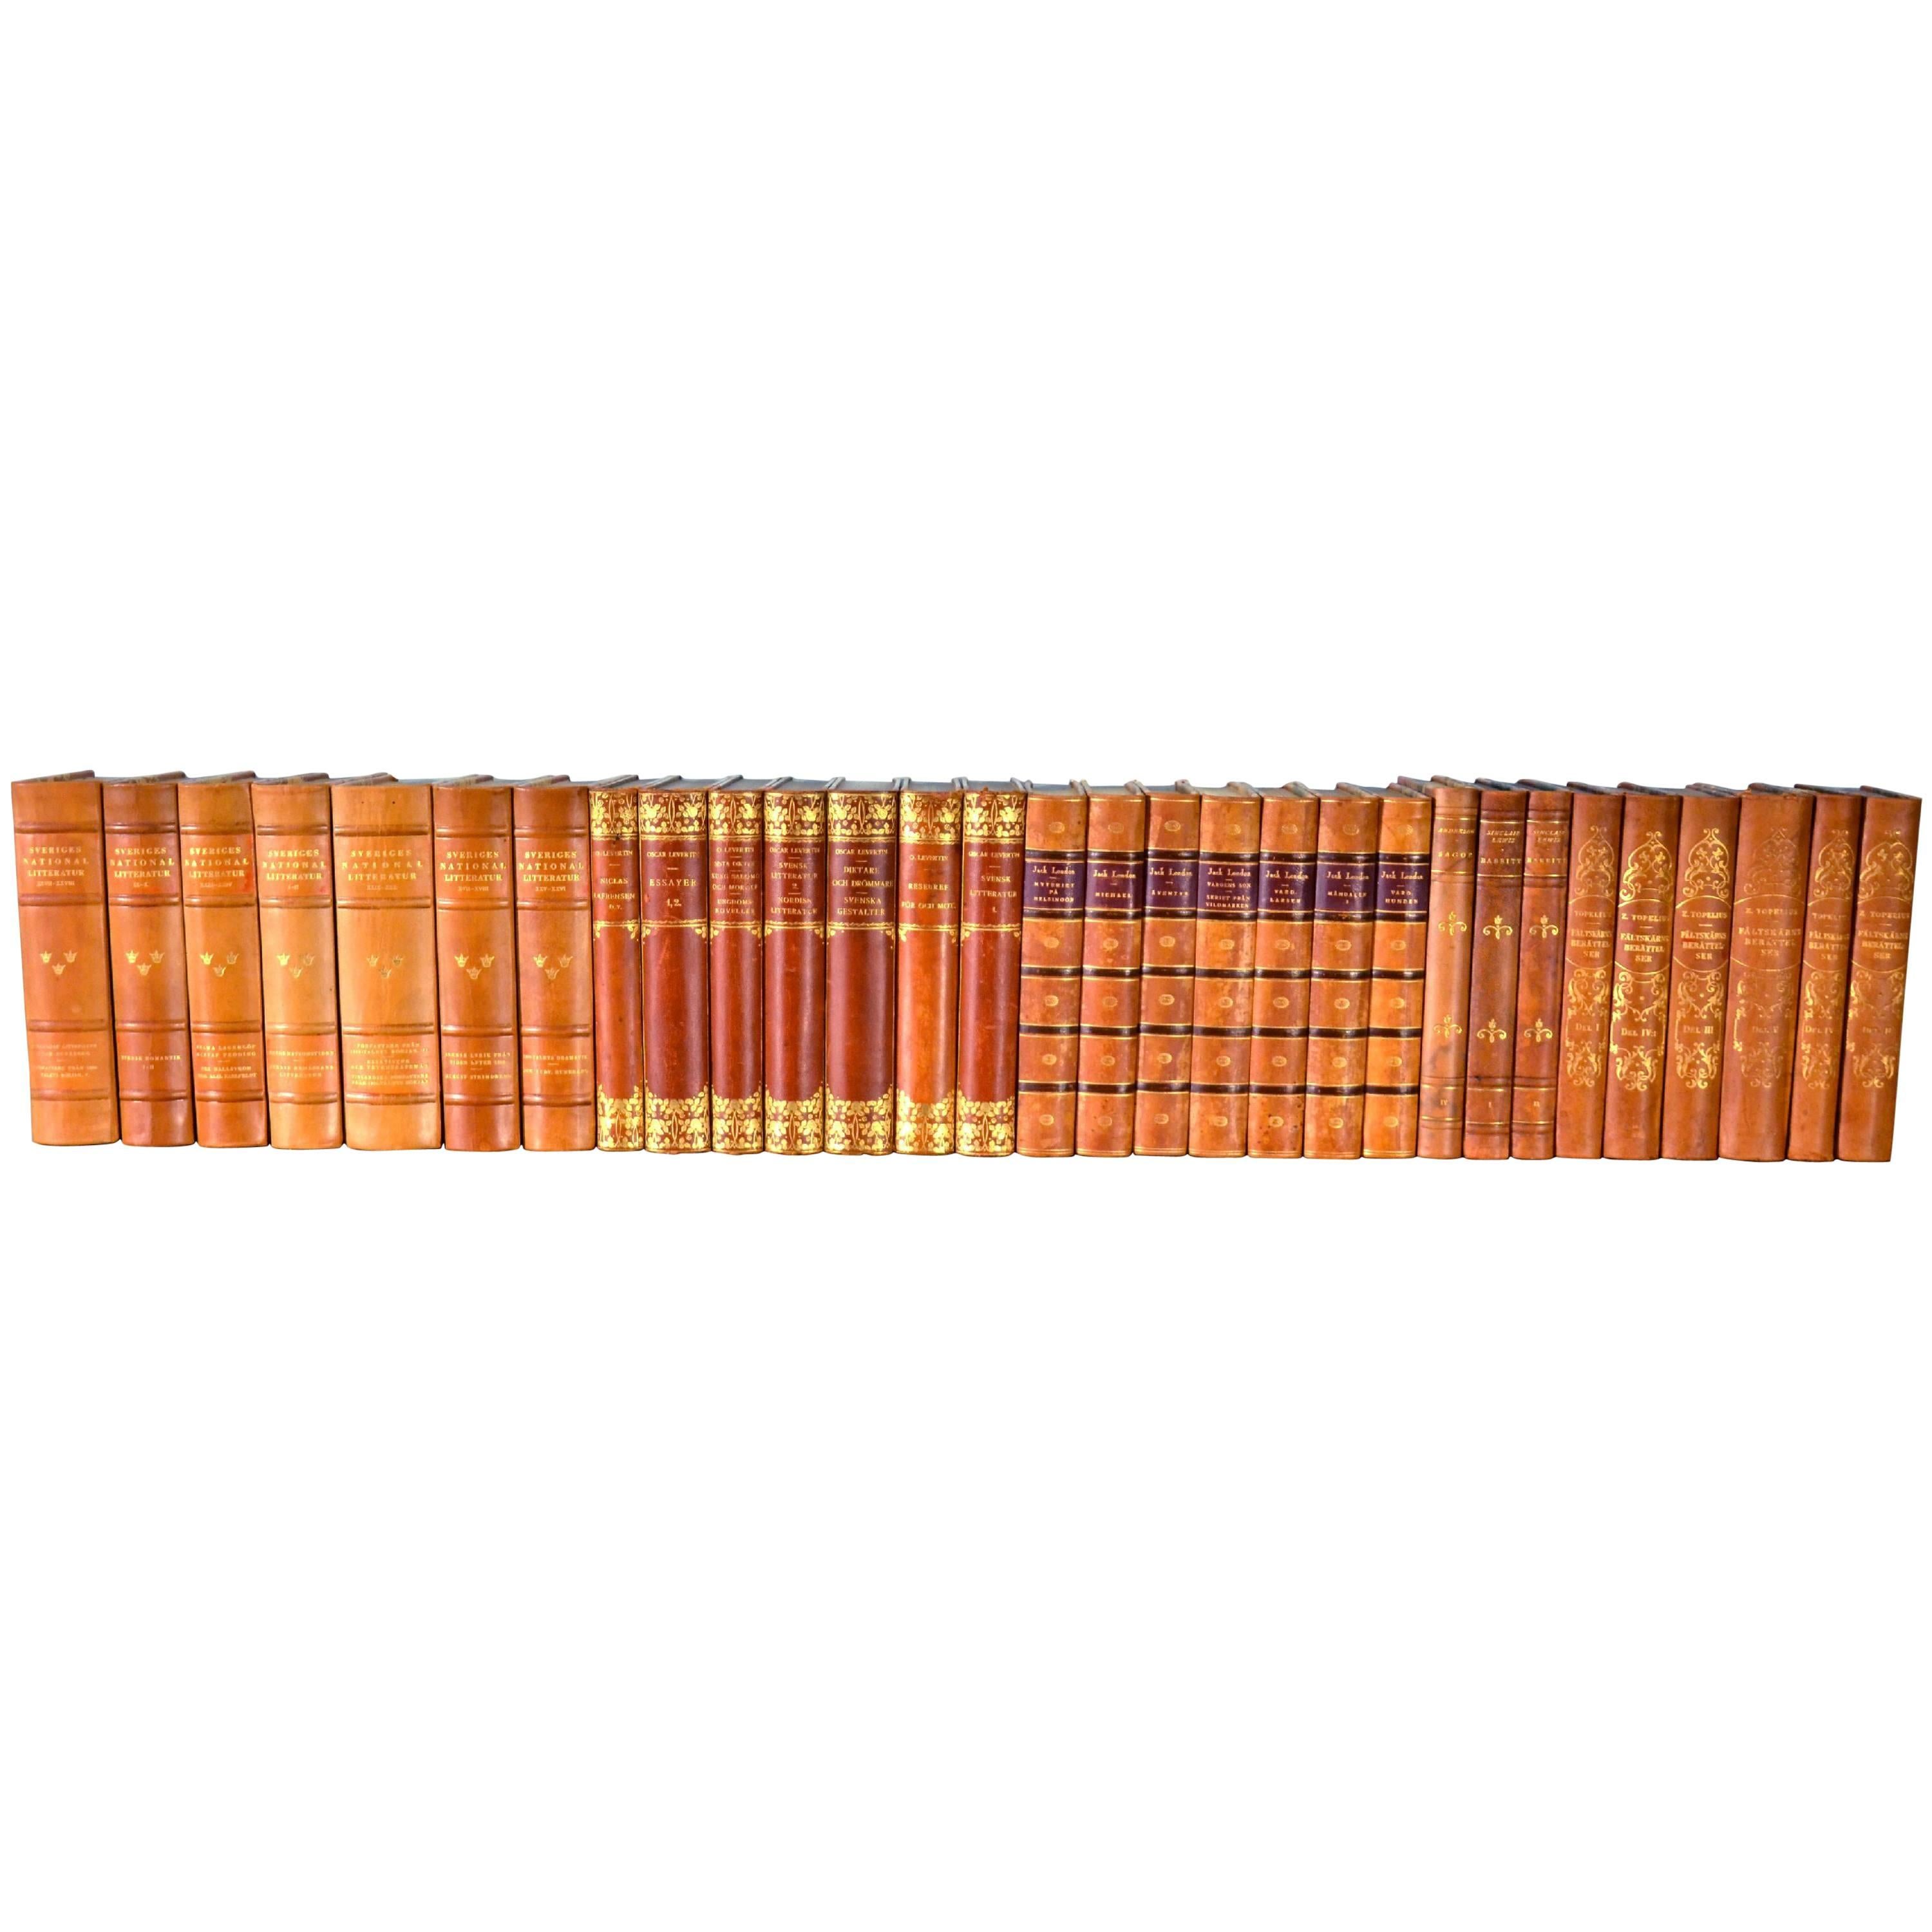 Collection of Leather Bound Books, Series 117